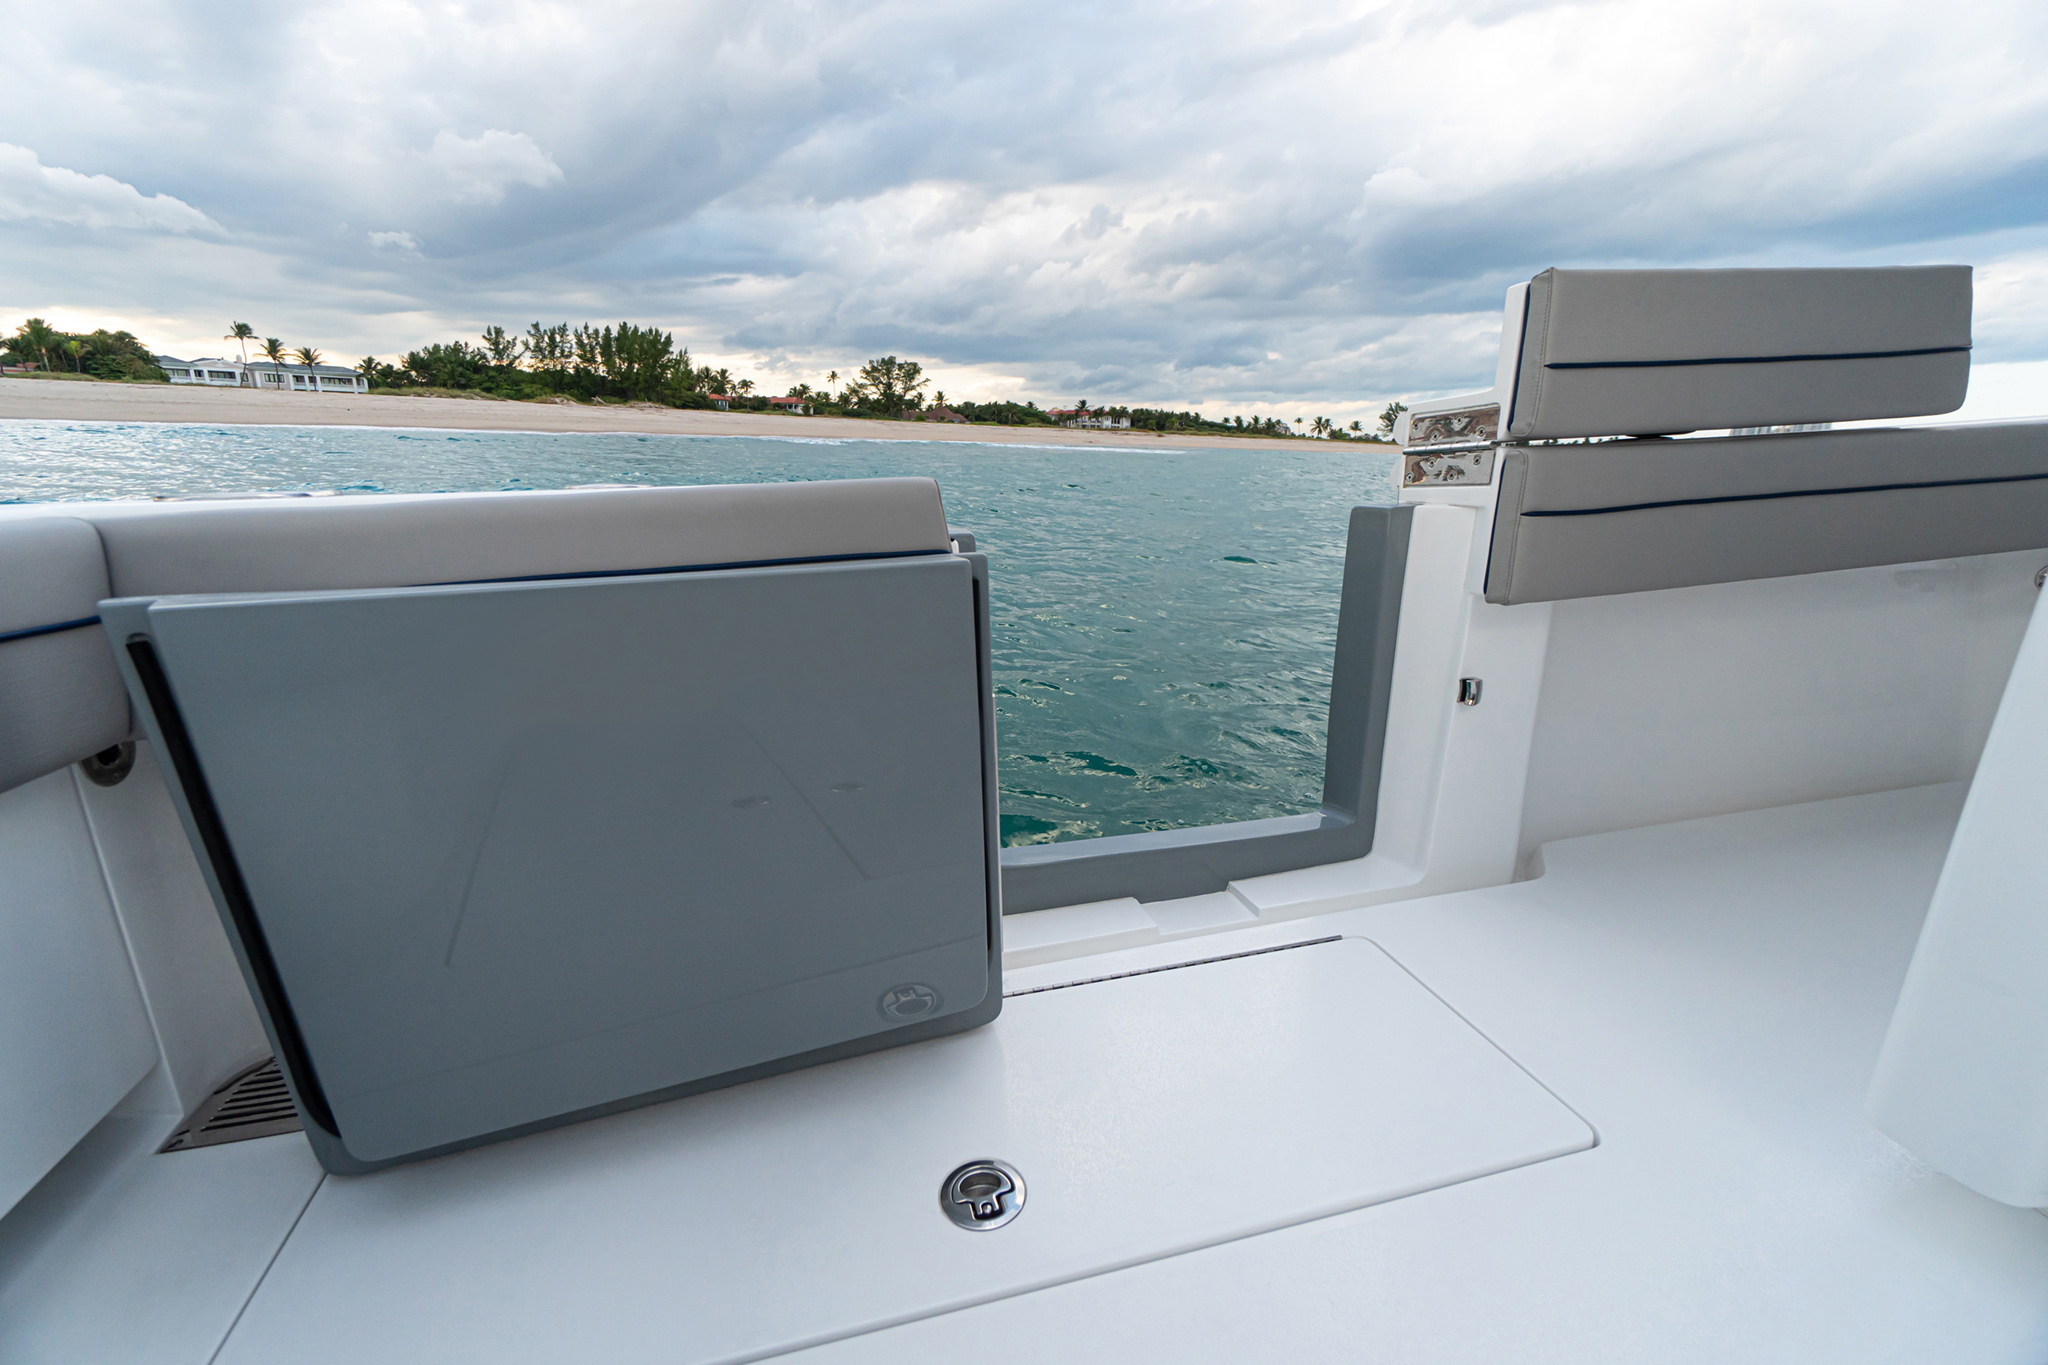 Standard port-side dive door swings inboard for convenience and safety.